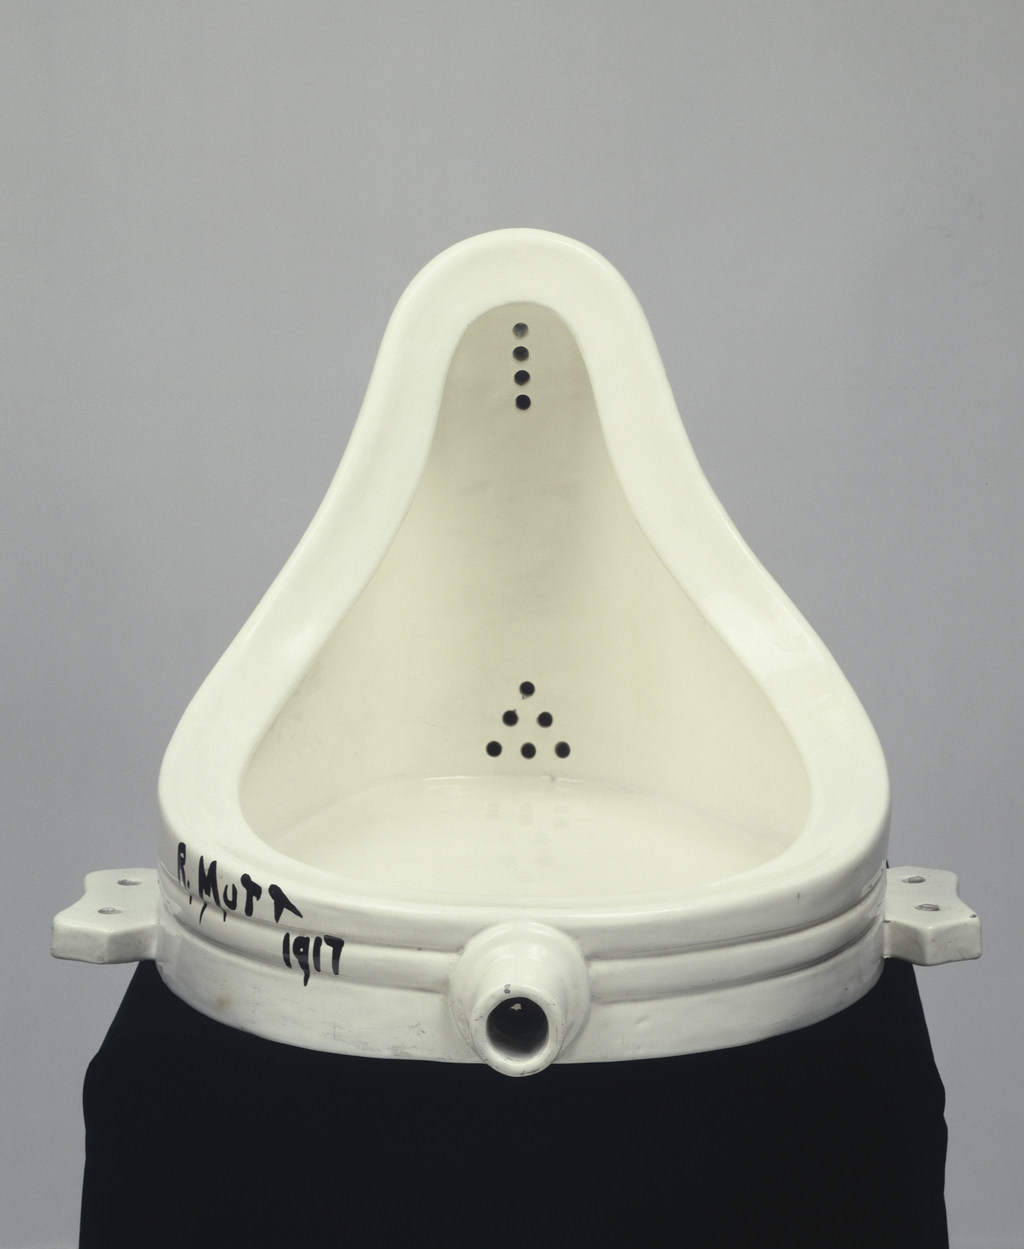 Detail from Marcel Duchamp’s “Fountain”, an upside-down urinal with ‘R. Mutt 1917’ written on it. When Danielle So was asked about it in an interview, it changed the way she looked at ordinary objects and artworks. Photo: SCMP